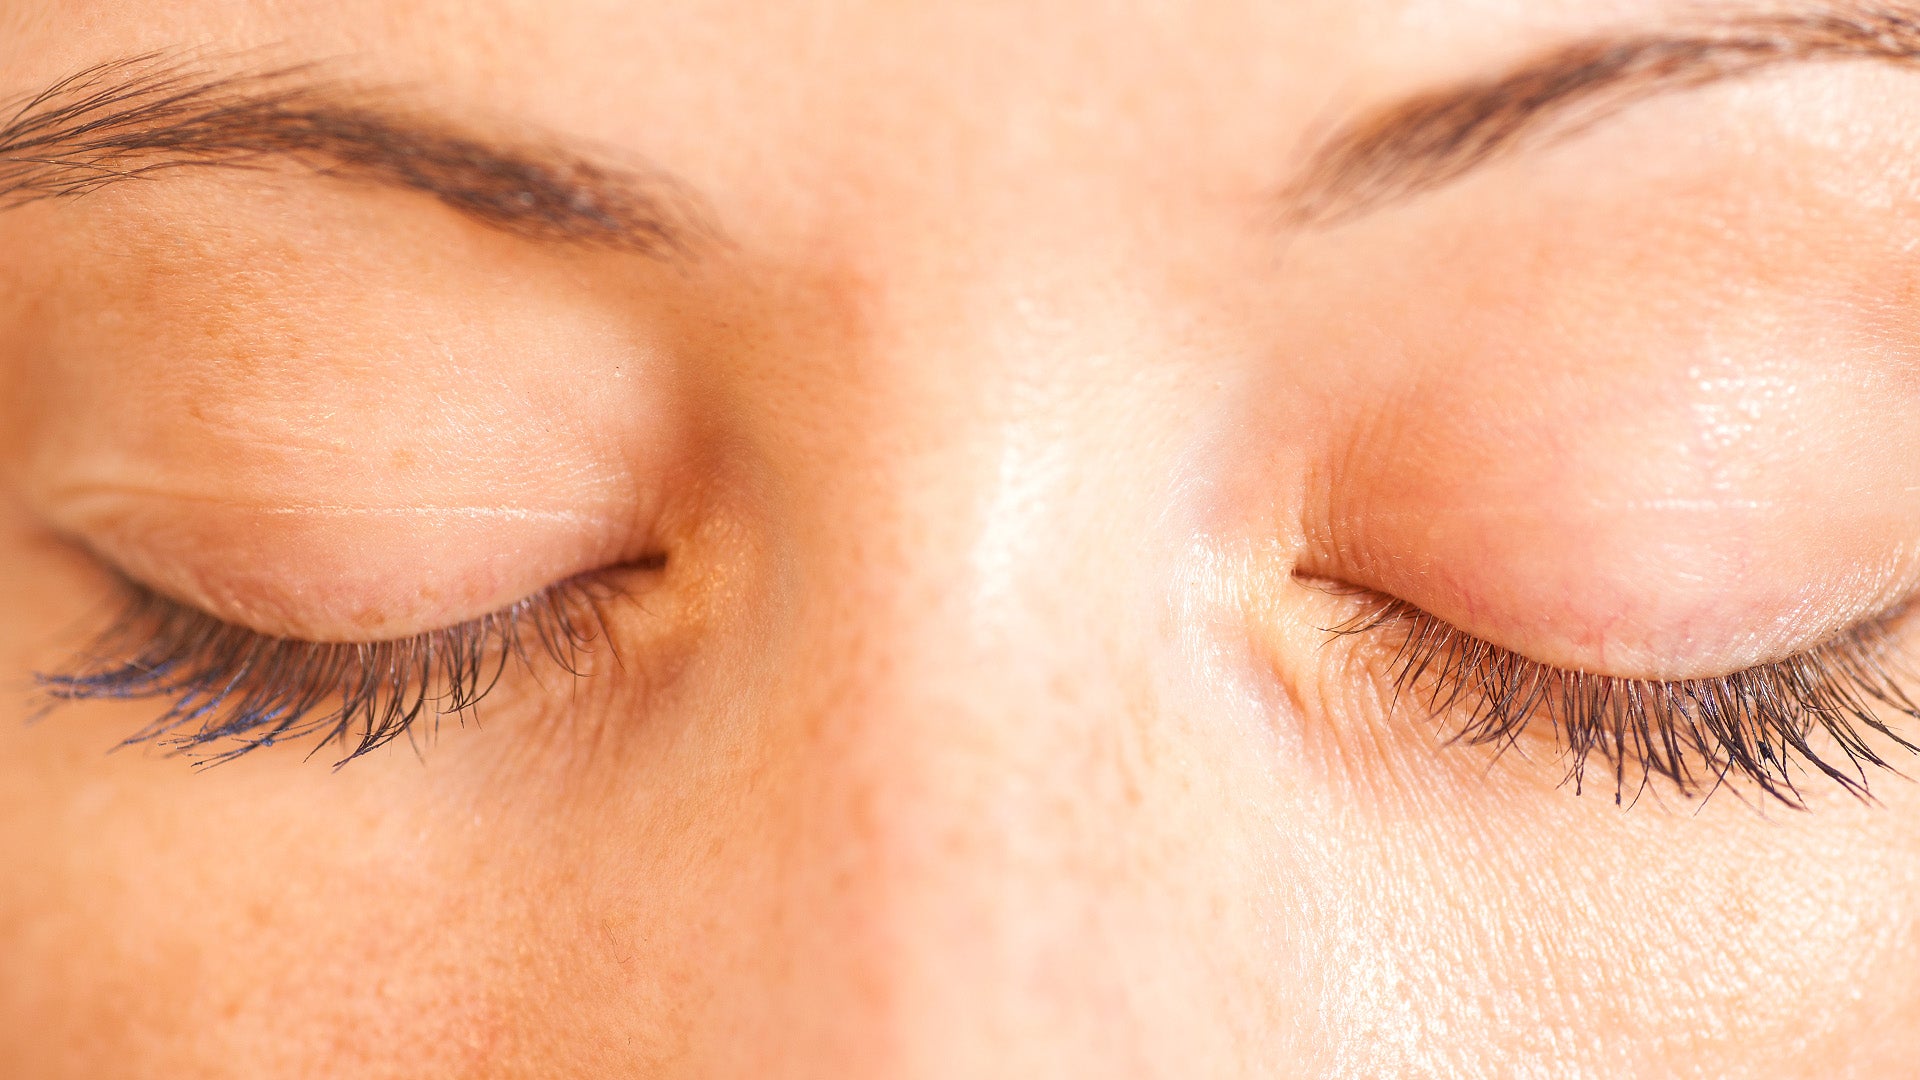 HOW TO GET RID OF TIRED-LOOKING EYES